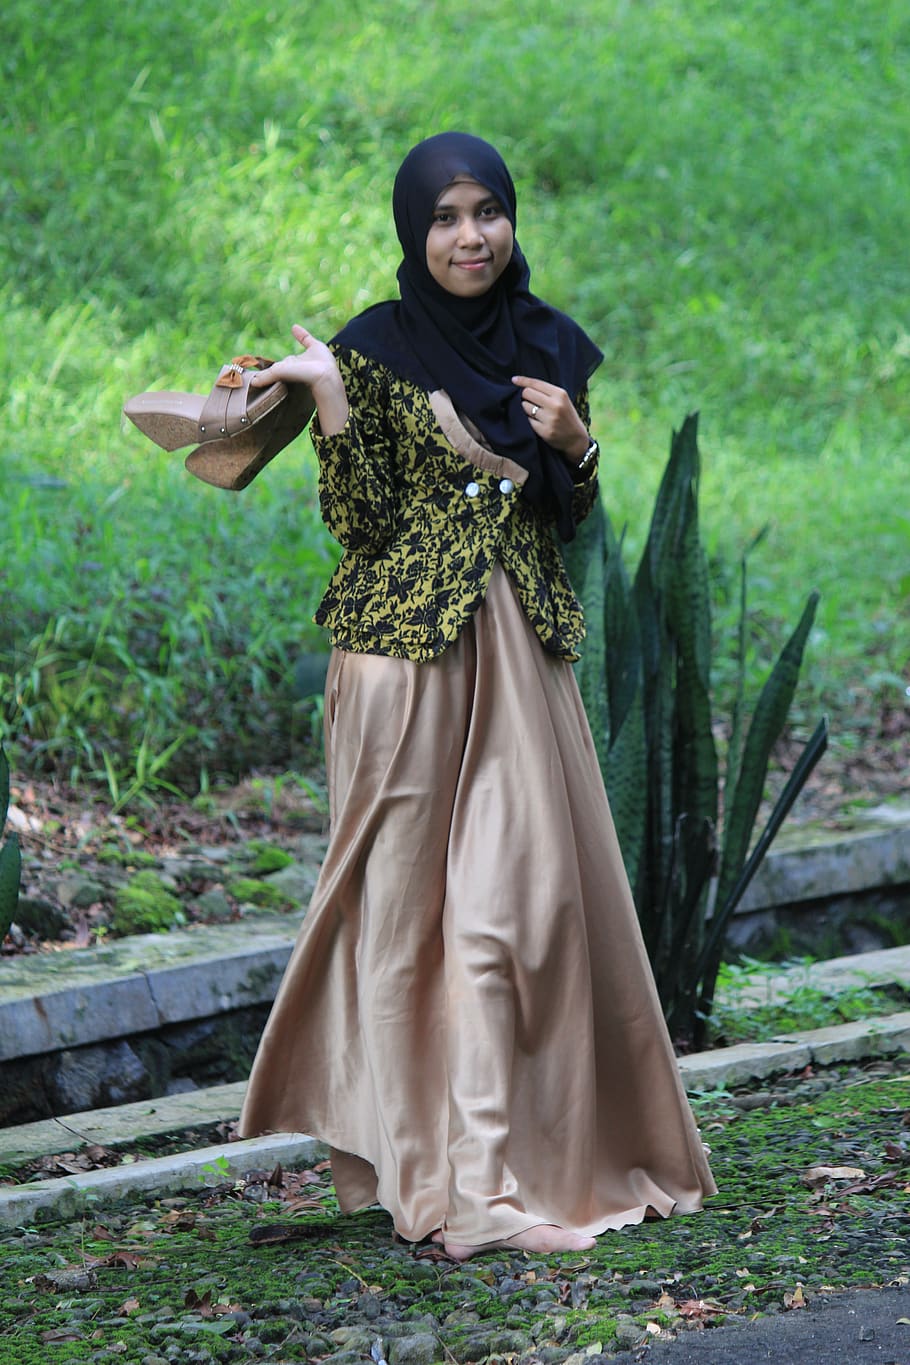 islamic, female, cute, shoes, root, asian, hijab, outdoor, smile, forest